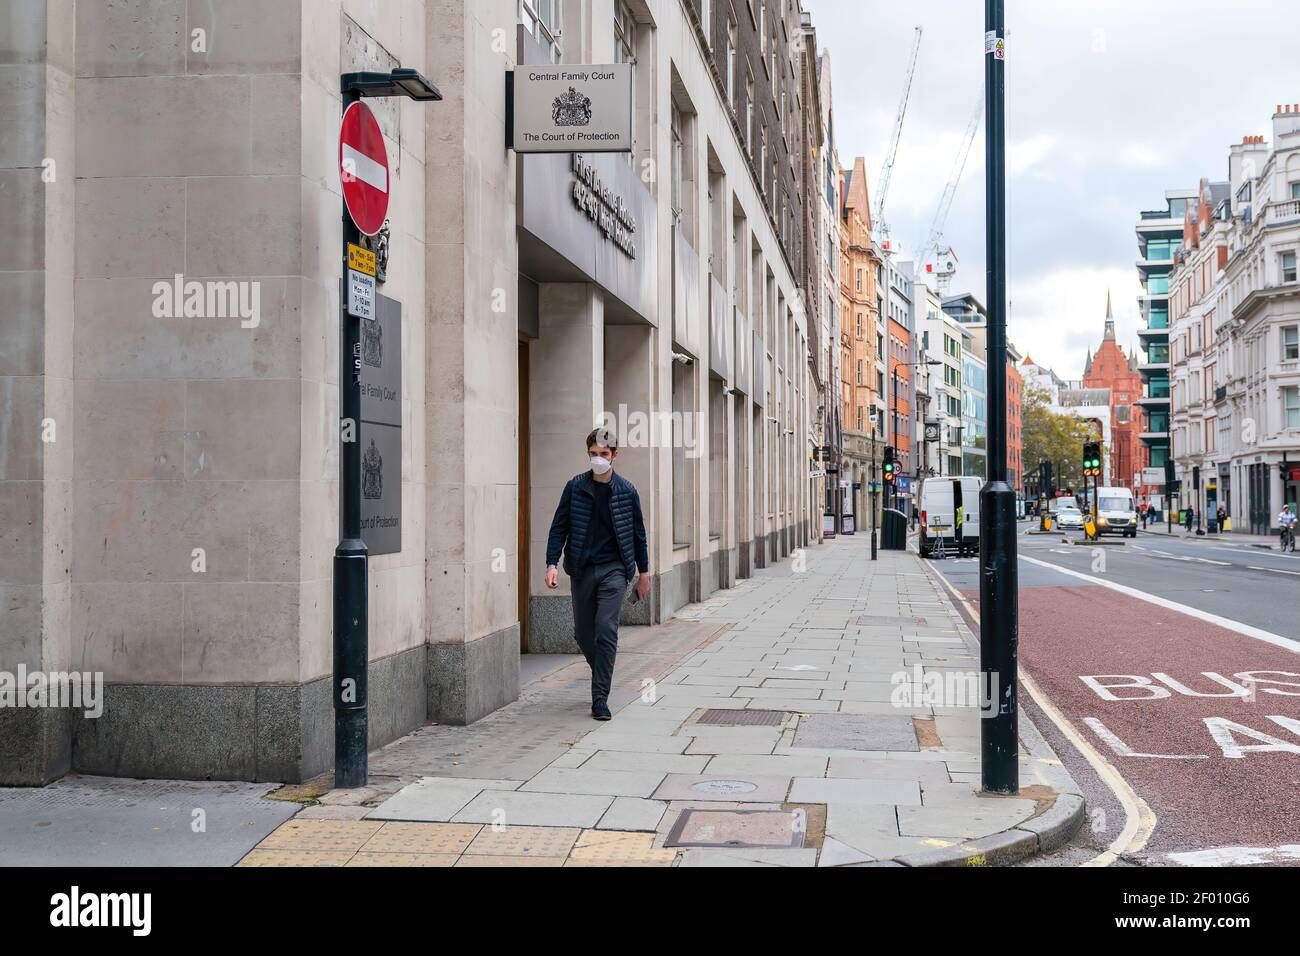 LONDON, ENGLAND - OCTOBER 23, 2020:  Man wearing a face mask walking outside the Central Family Court, Principal Registry of the Family Division of th Stock Photo